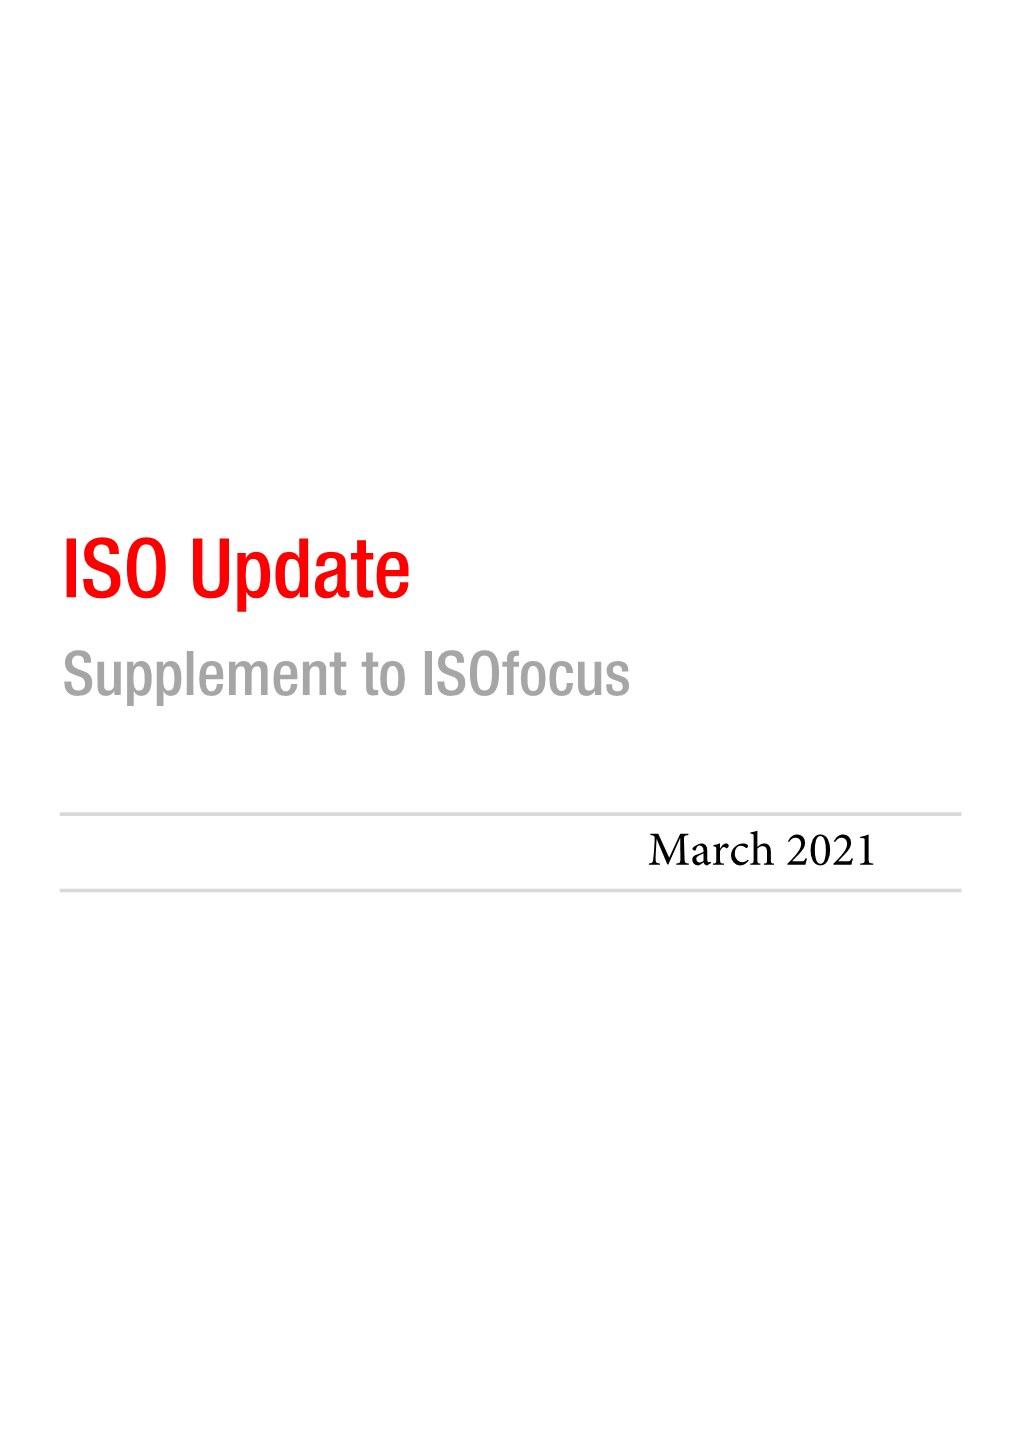 March 2021 International Standards in Process